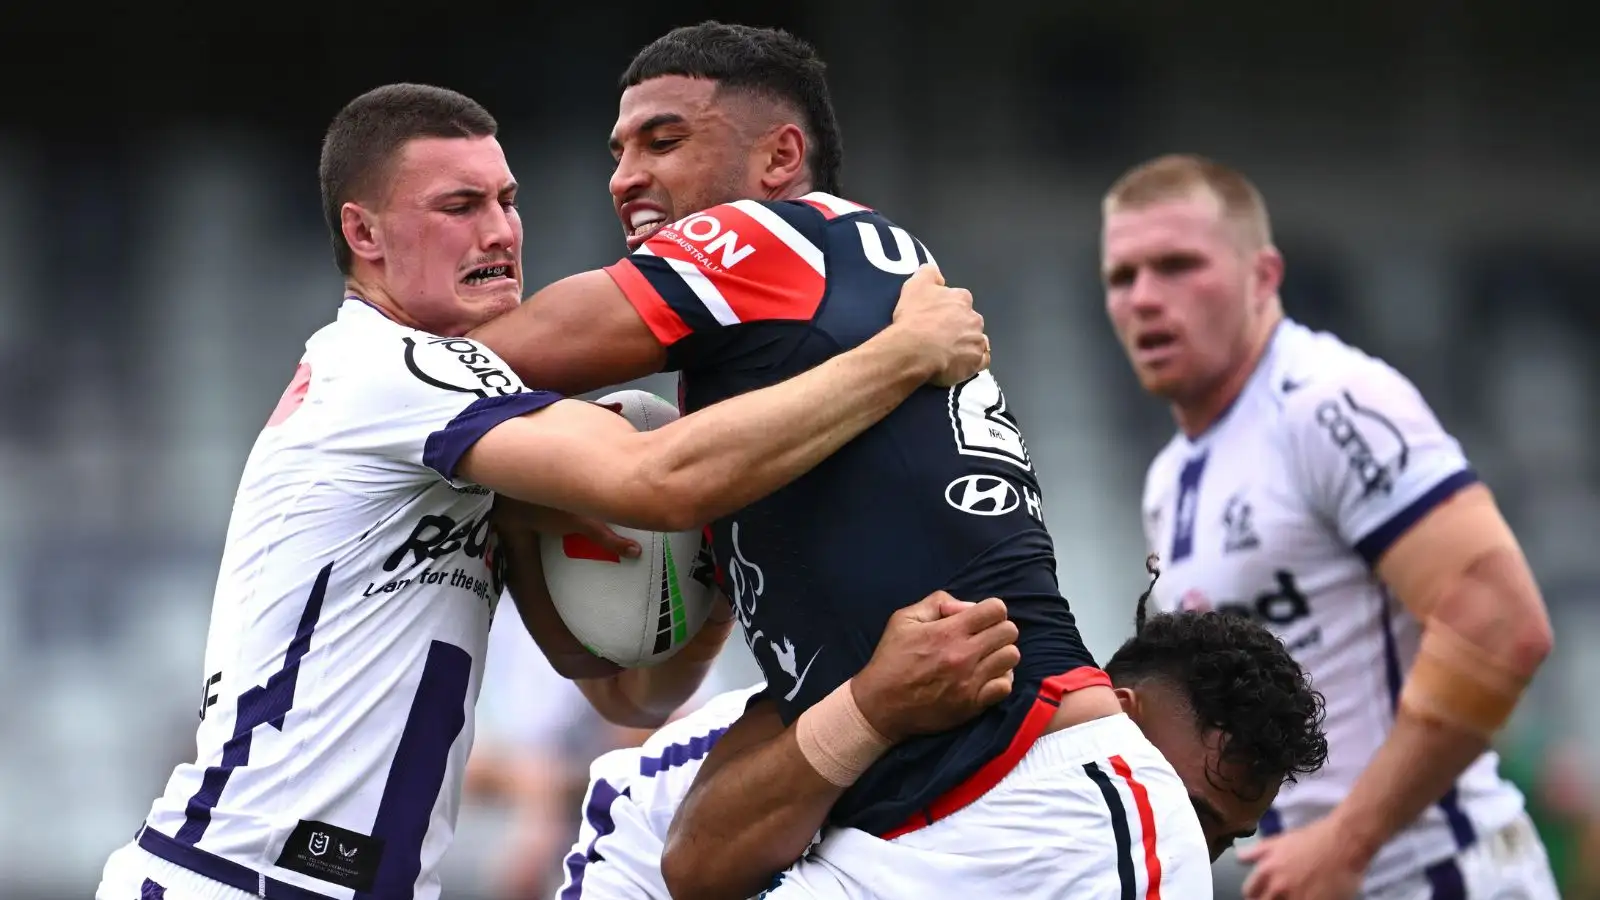 Castleford Tigers snap up overseas utility for second signing of the day; Lebanon ace can’t wait to ‘showcase talent in Super League’